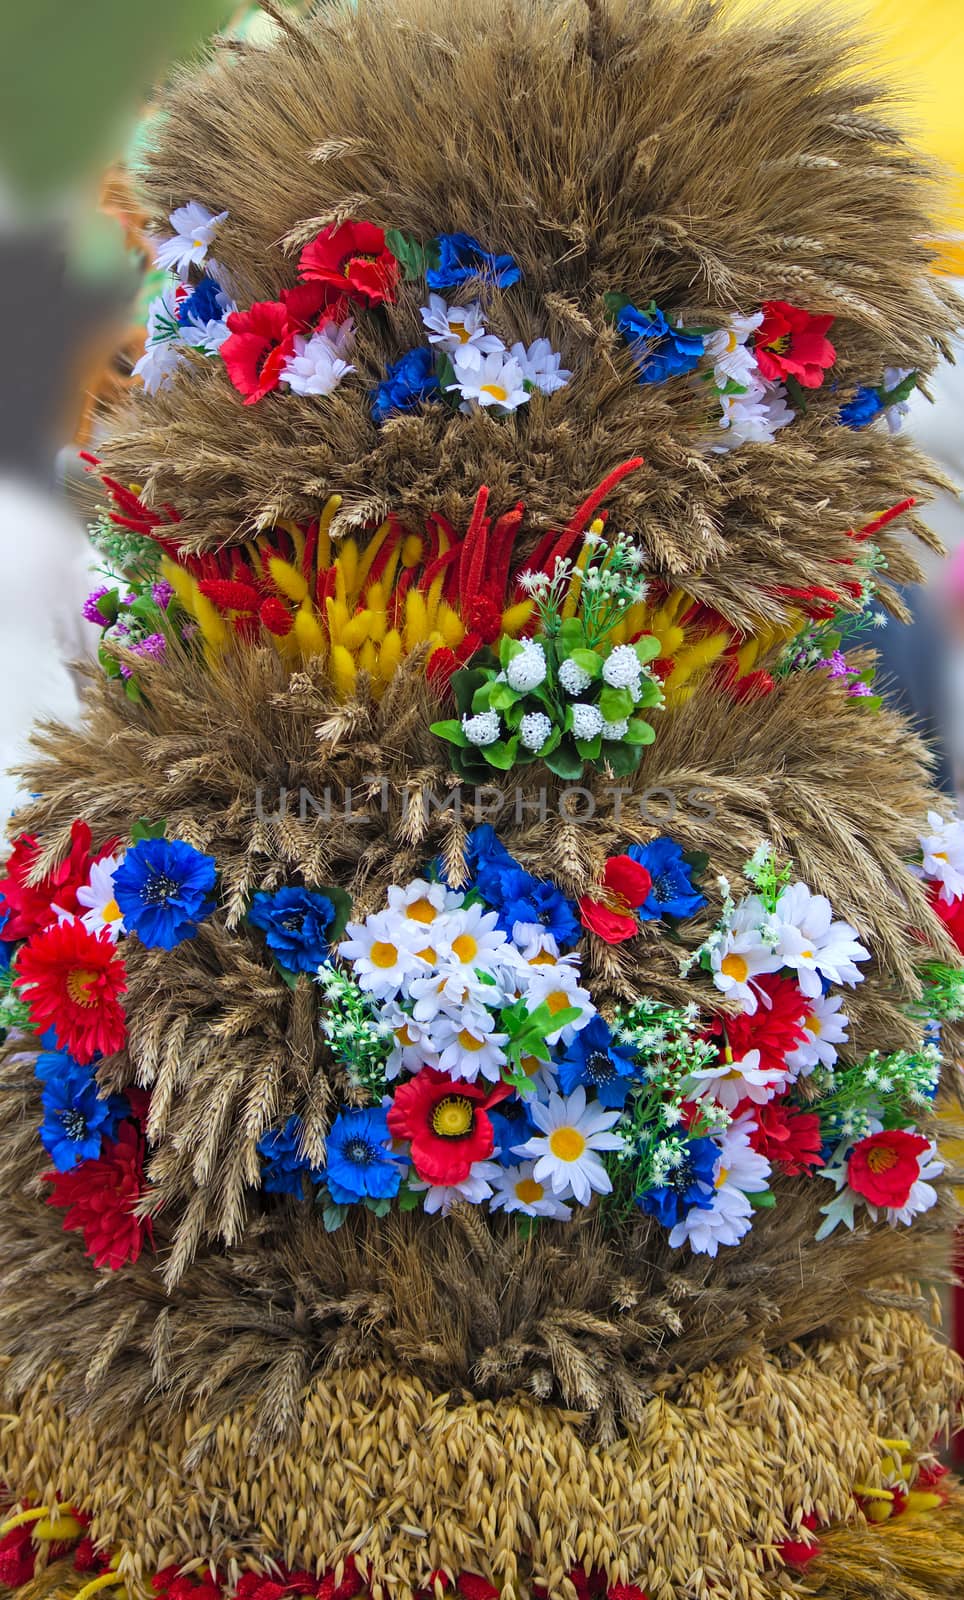 Sheaf beautifully decorated with flowers from stalks of grain cereals.